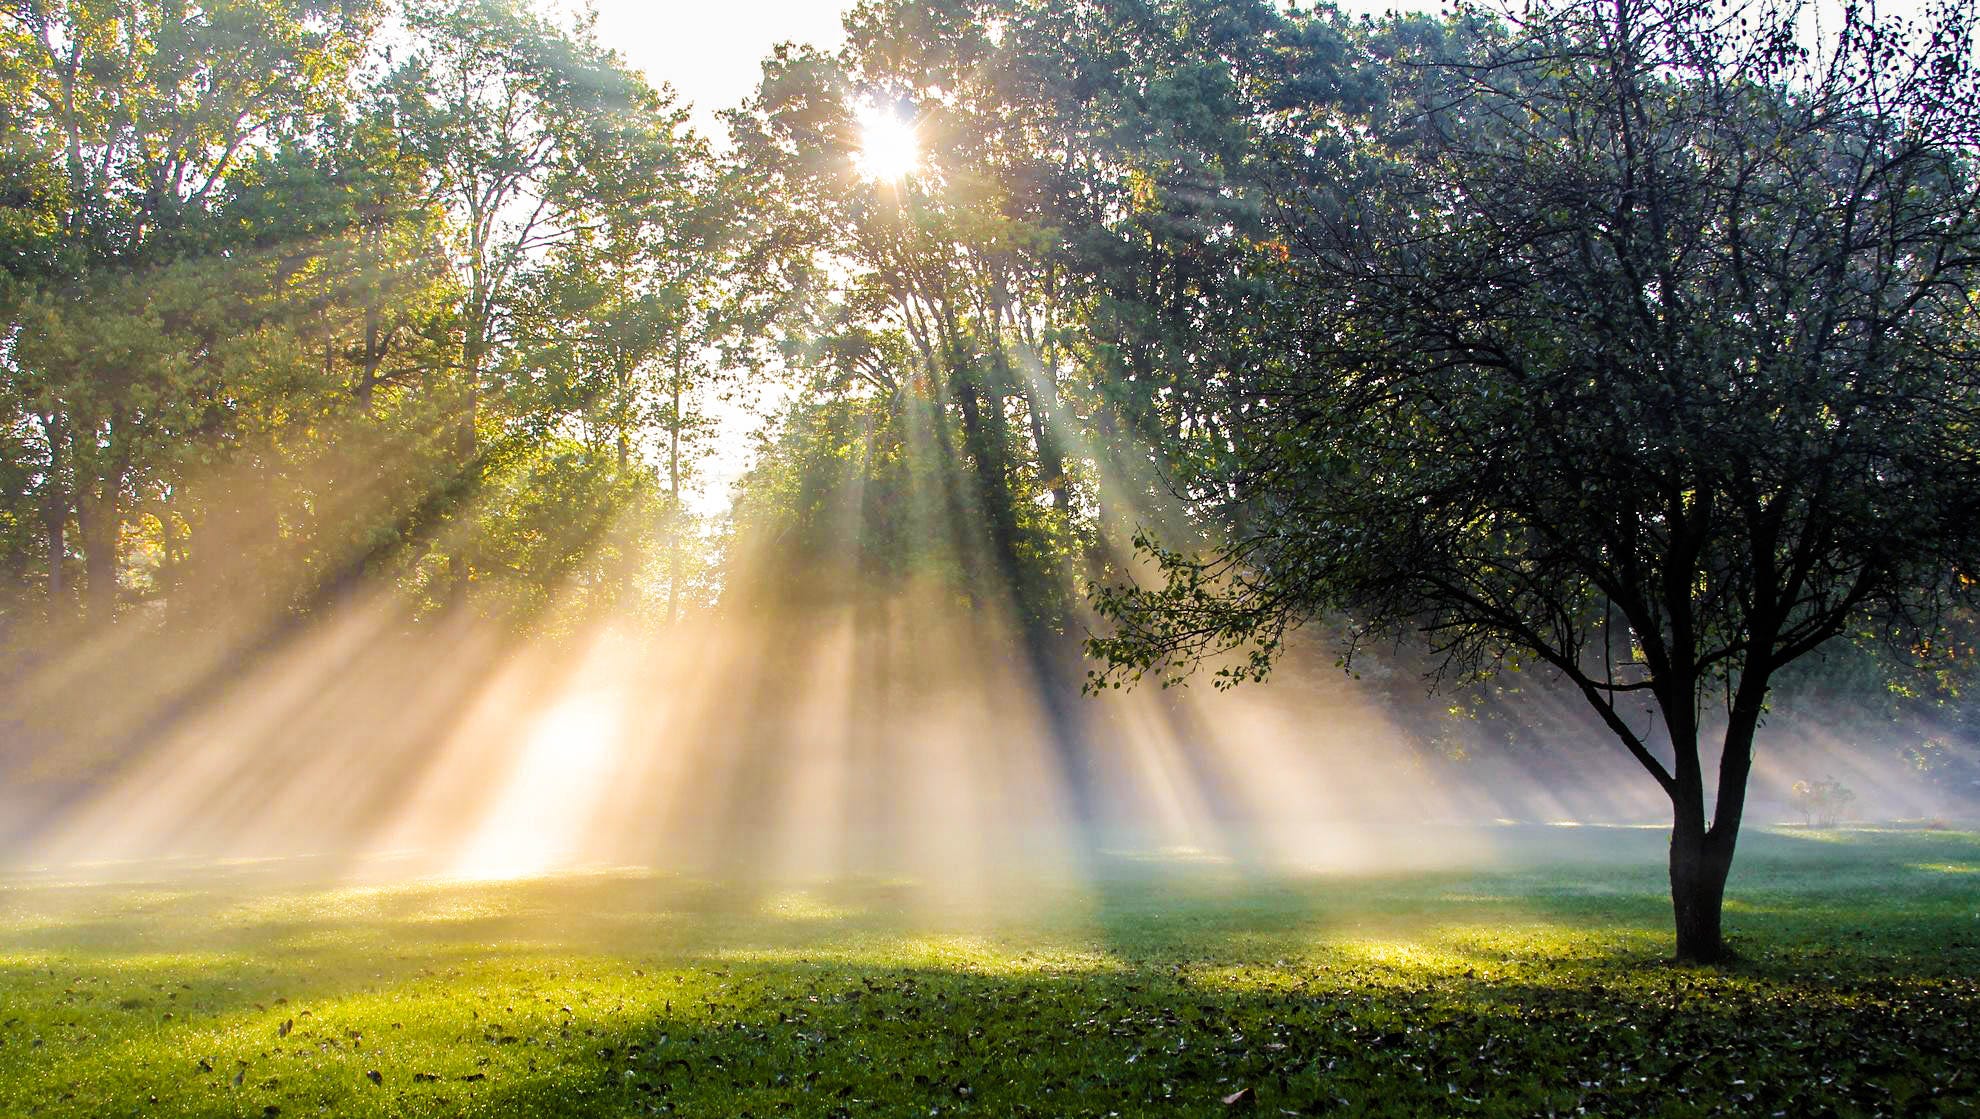 Derek Gauci, his wife Lauren and dog Bruce were preparing for a walk when they spotted these beautiful sunbeams coming through the trees in their yard.  "It proves you don't need to go way up north to find true Michigan beauty," he said.  Gauci is @falconfilmstudios on Instagram.